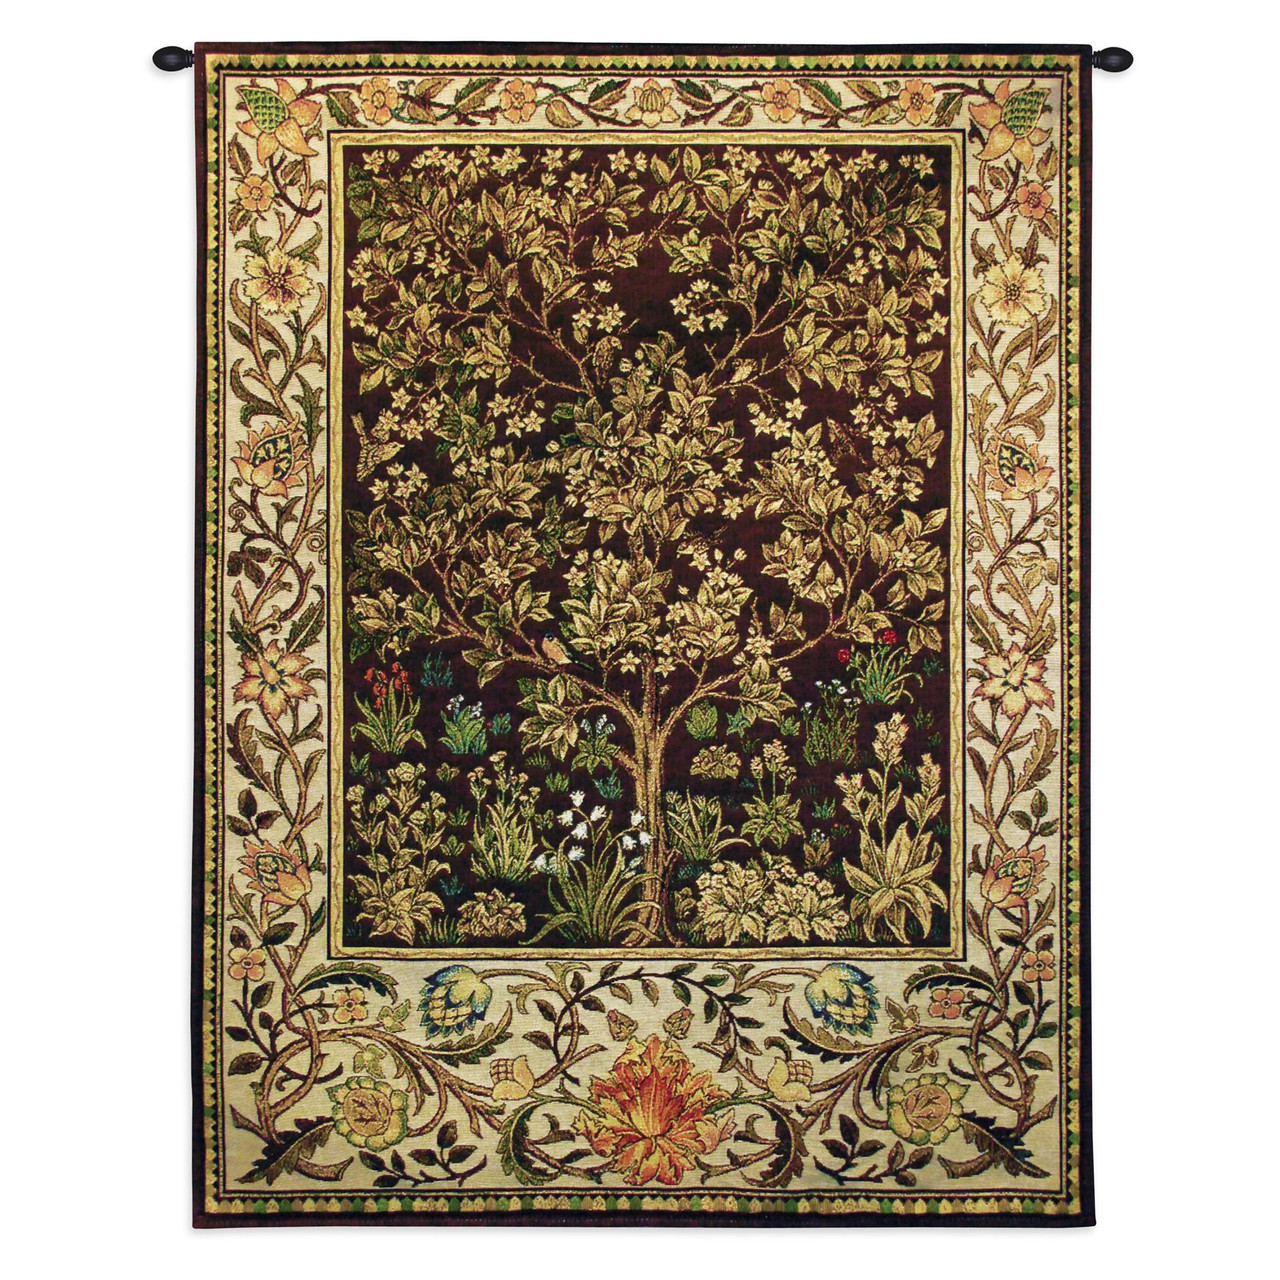 Tree of Life Umber by William Morris Arts and Crafts Style Woven Tapestry  Wall Art Hanging Ornate Spiritual Tree Pattern 100% Cotton USA Size  40x30